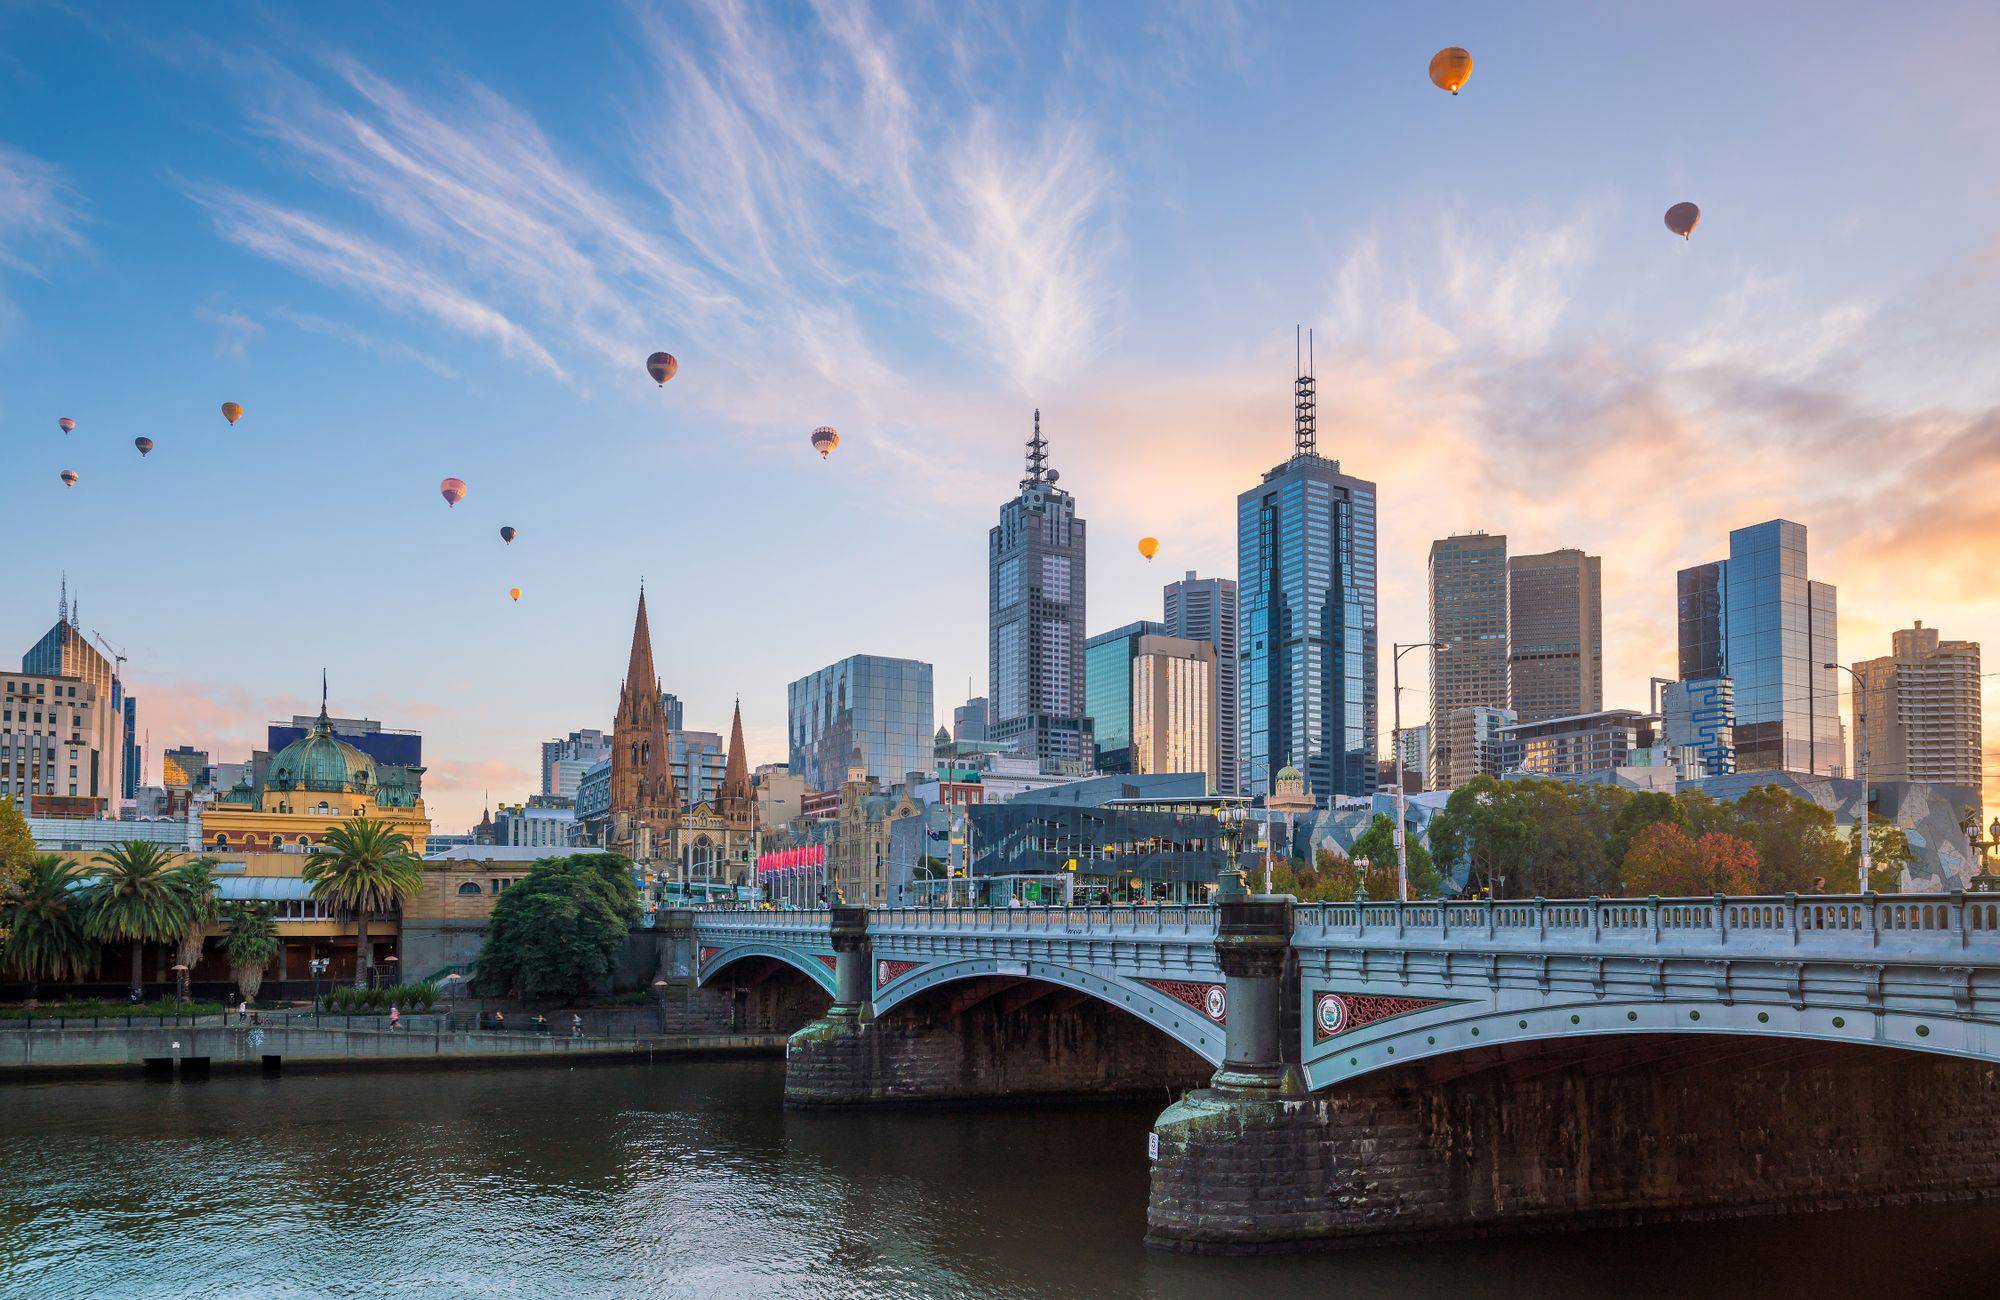 air balloons over the CBD district in Melbourne